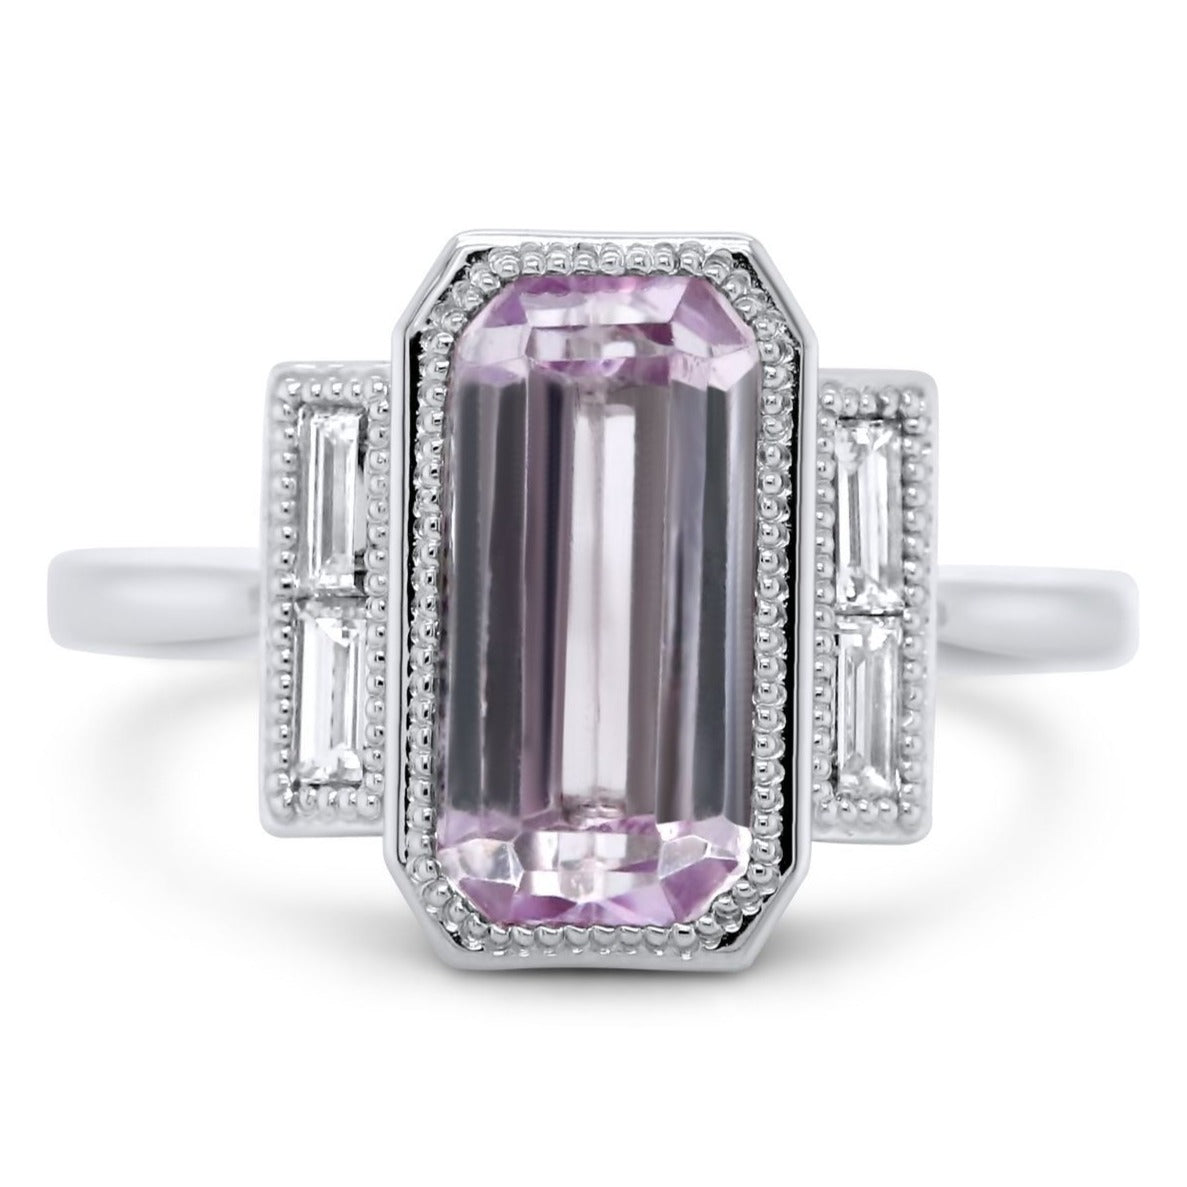 14k white gold pink kunzite baguette gemstone ring with small diamond baguette side stones